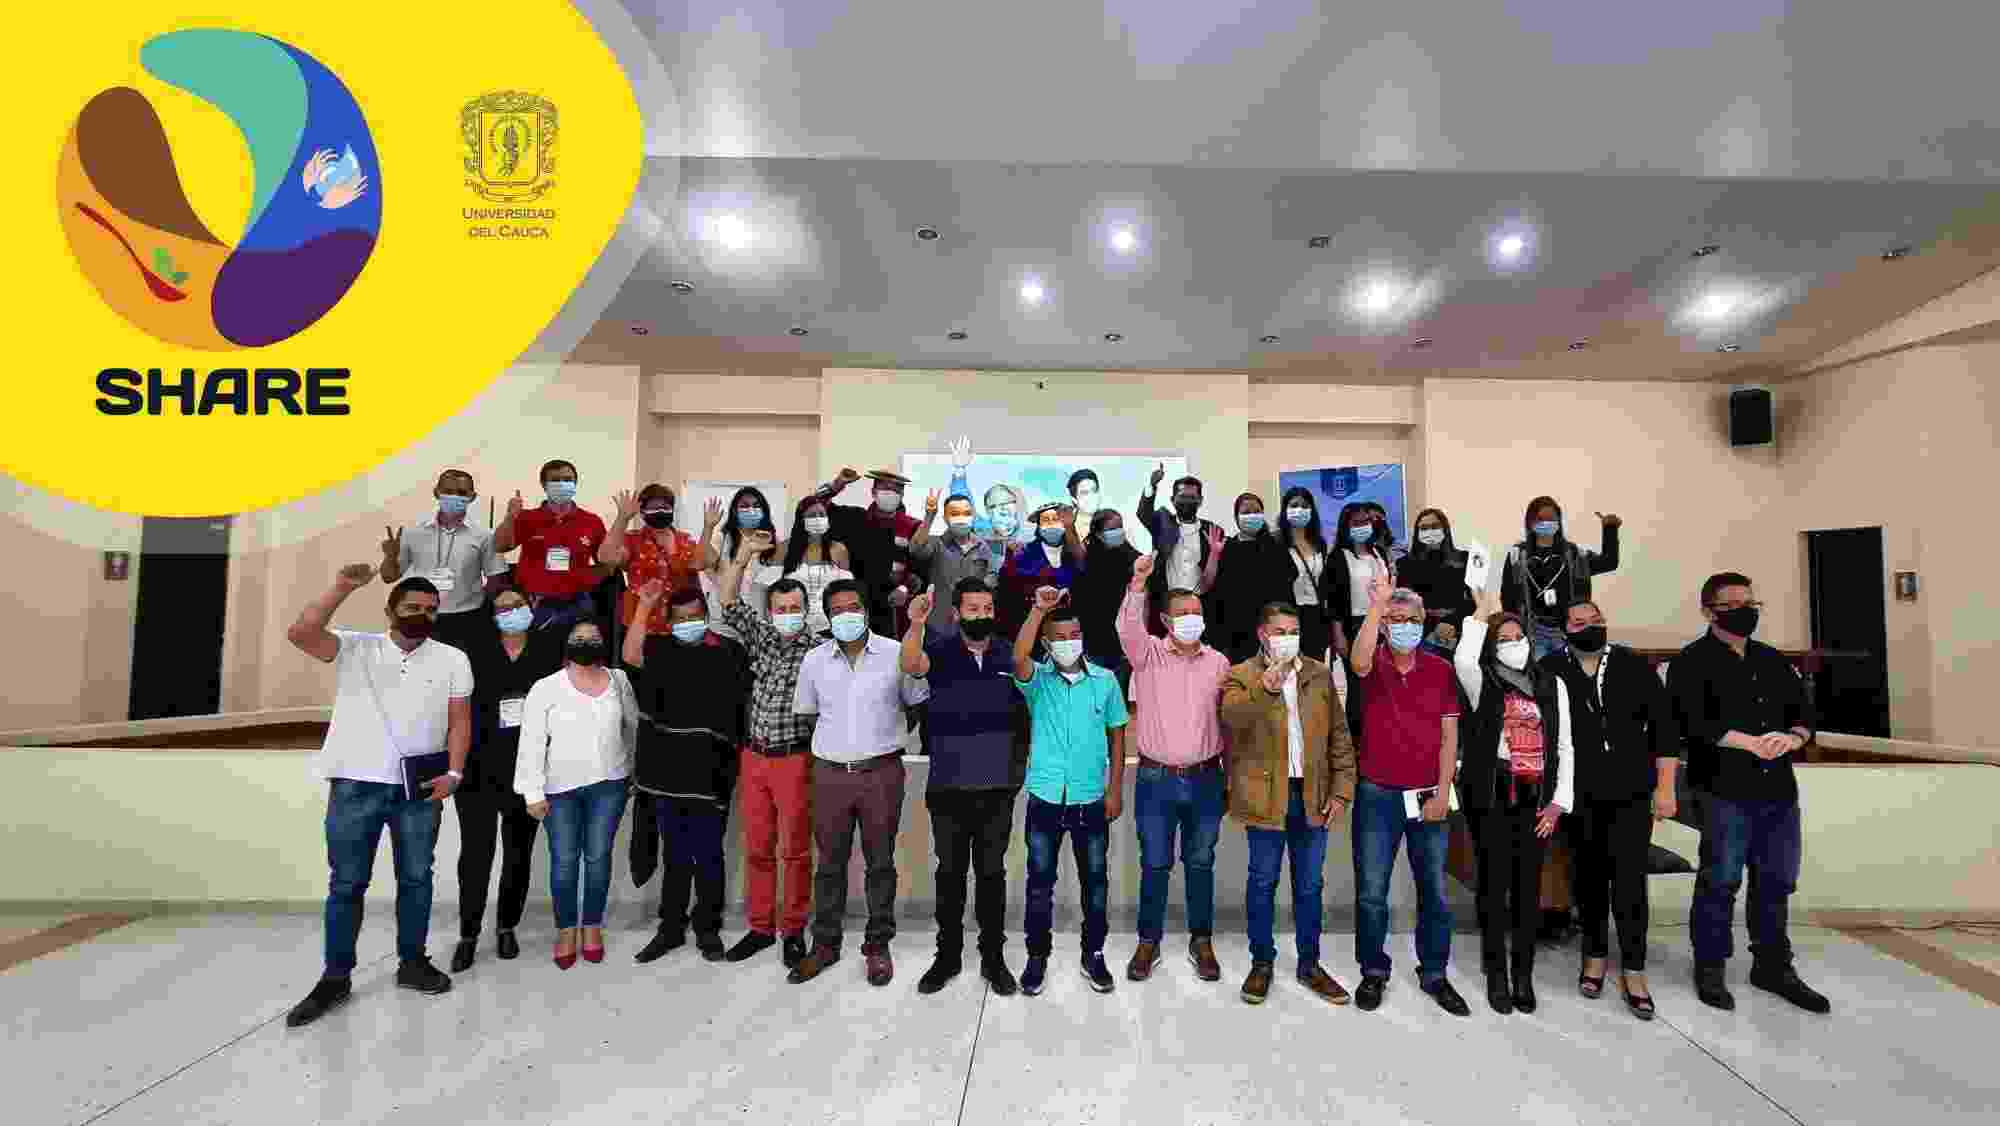 Image shows the Universidad del Cauca team grouped together, celebrating the launch of SHARE, with the project logo included on the image